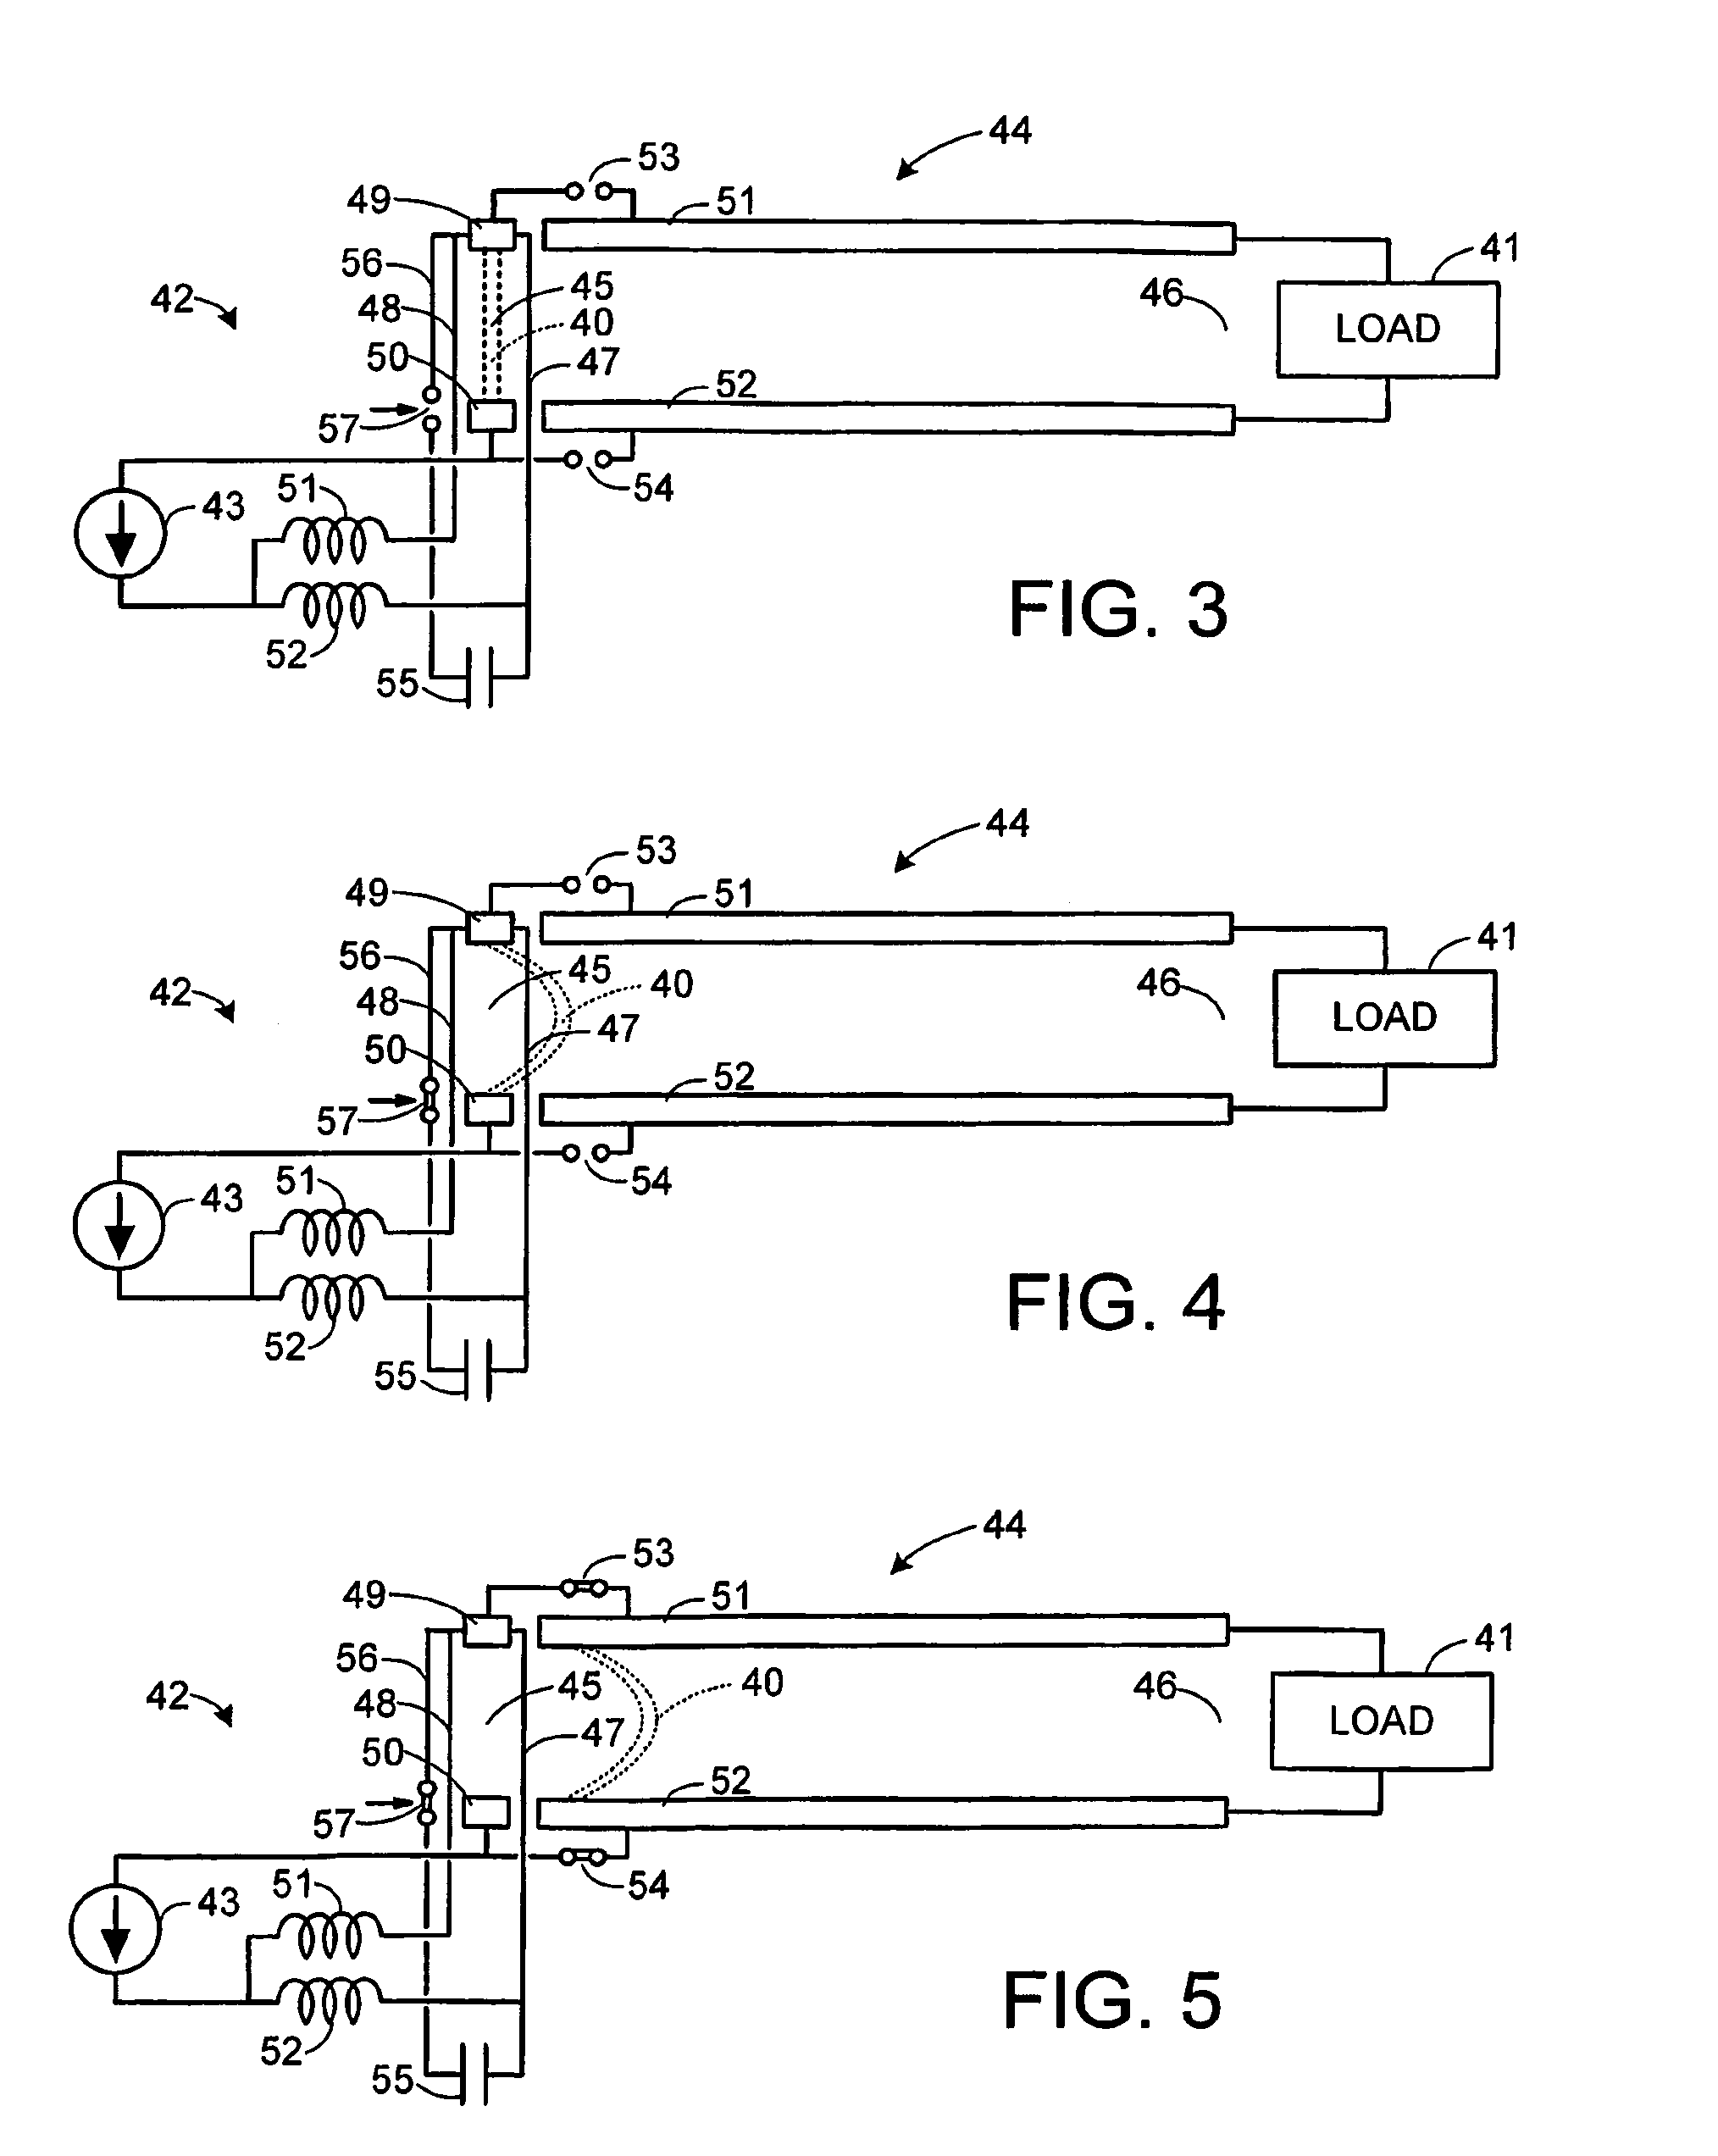 Pulsed power system including a plasma opening switch